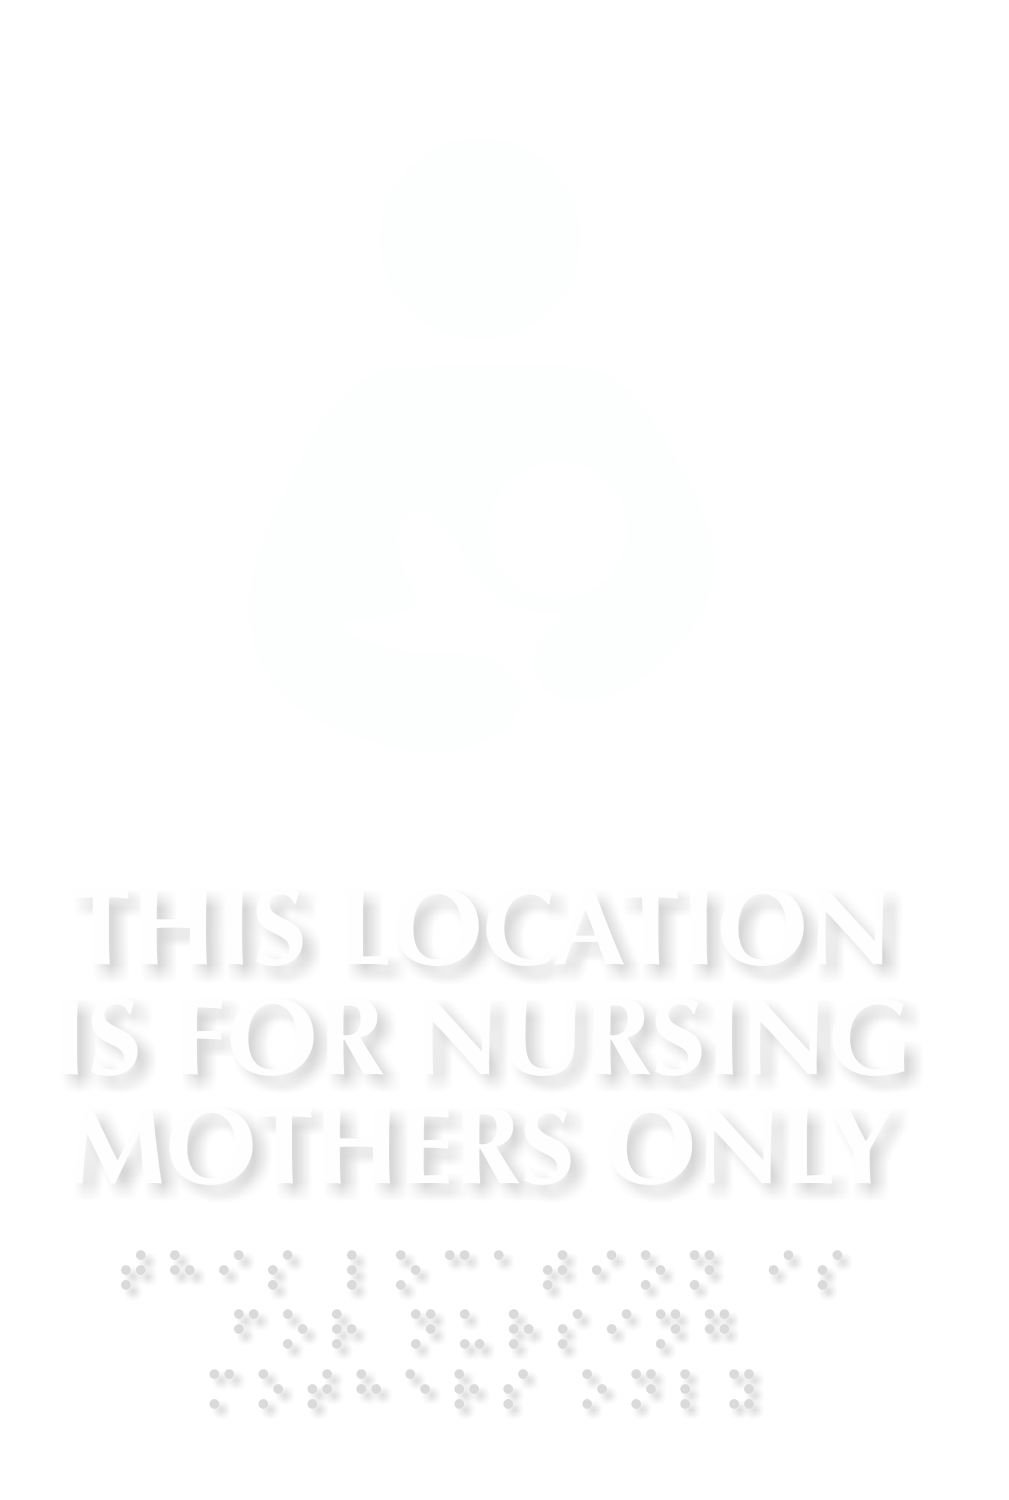 This Location Is For Nursing Mothers Only Braille Sign